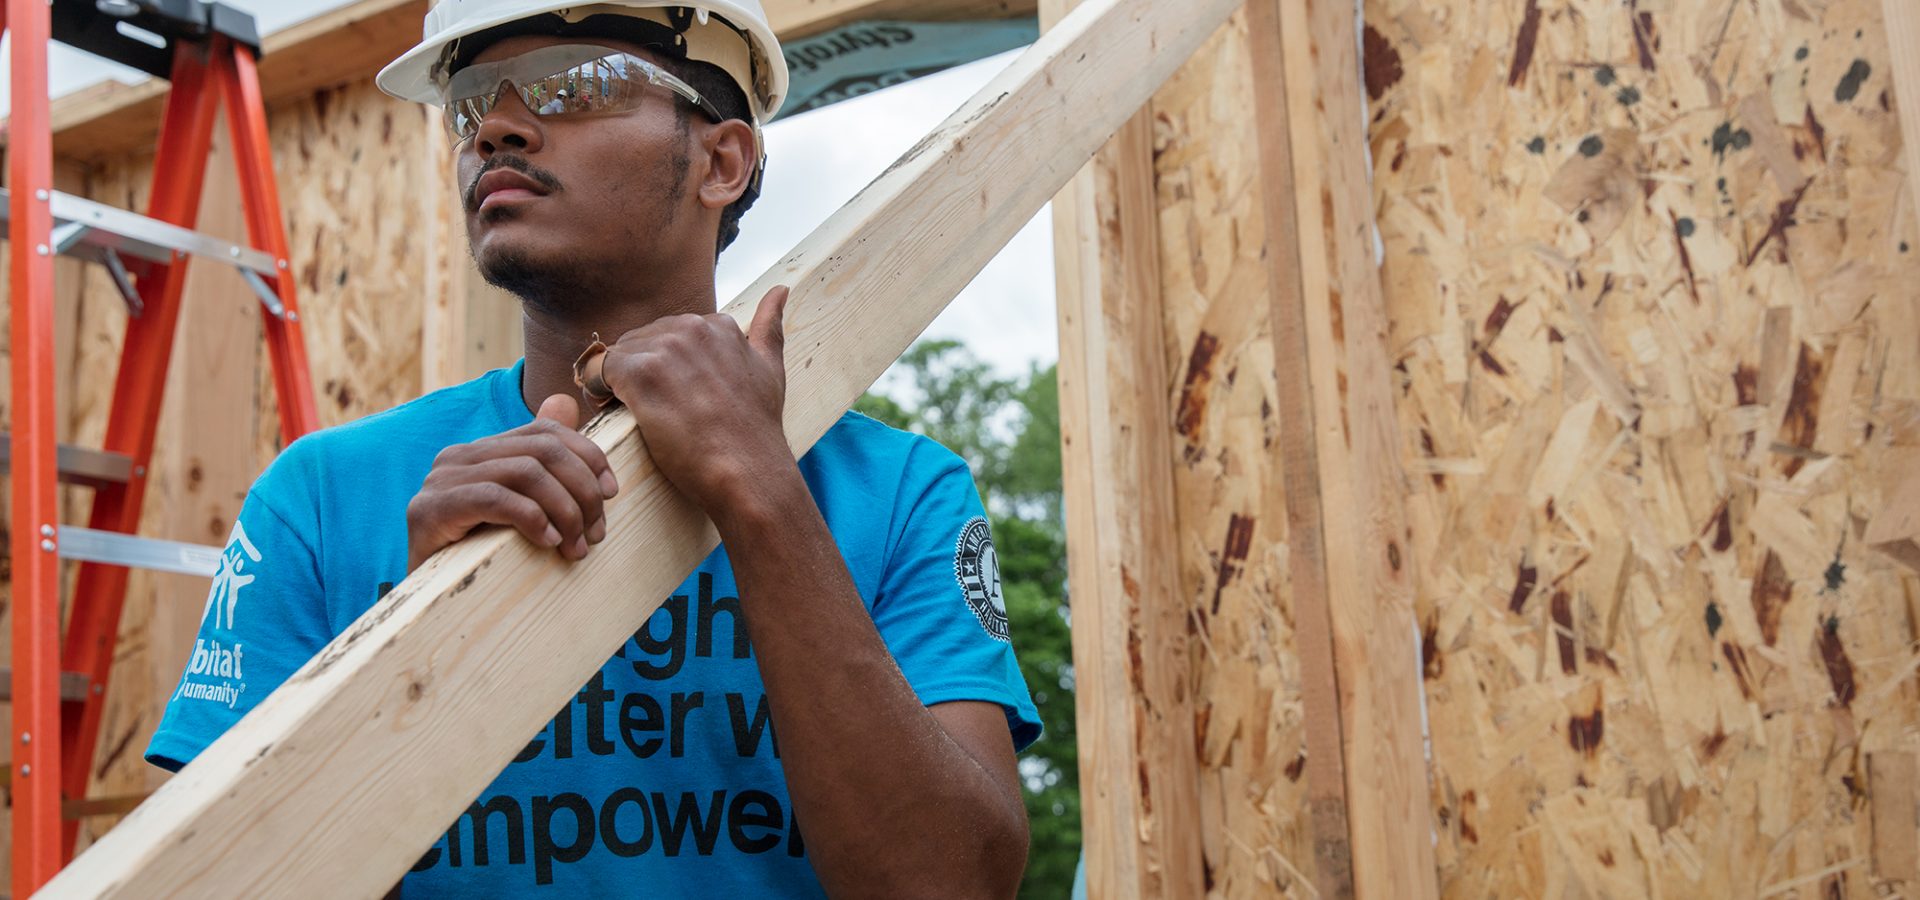 DES MOINES, IOWA, USA (05/16/17)- Teryon Smith, an AmeriCorps member, during Habitat for Humanity’s AmeriCorps Build-a-Thon in Des Moines, Iowa. ©Habitat for Humanity International/Jason Asteros